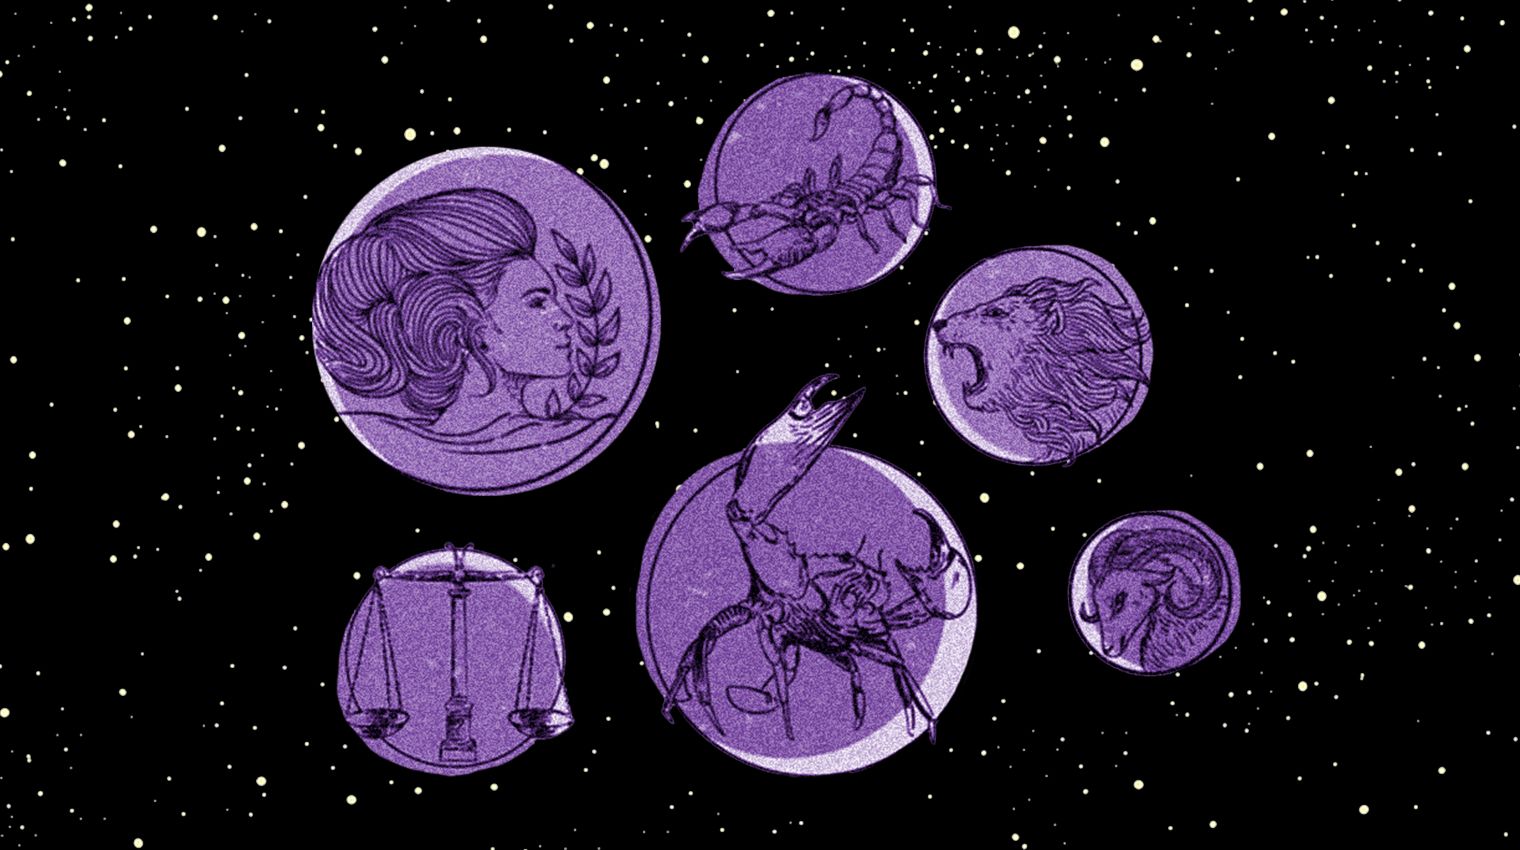 The Psychology of Why People Believe in Astrology